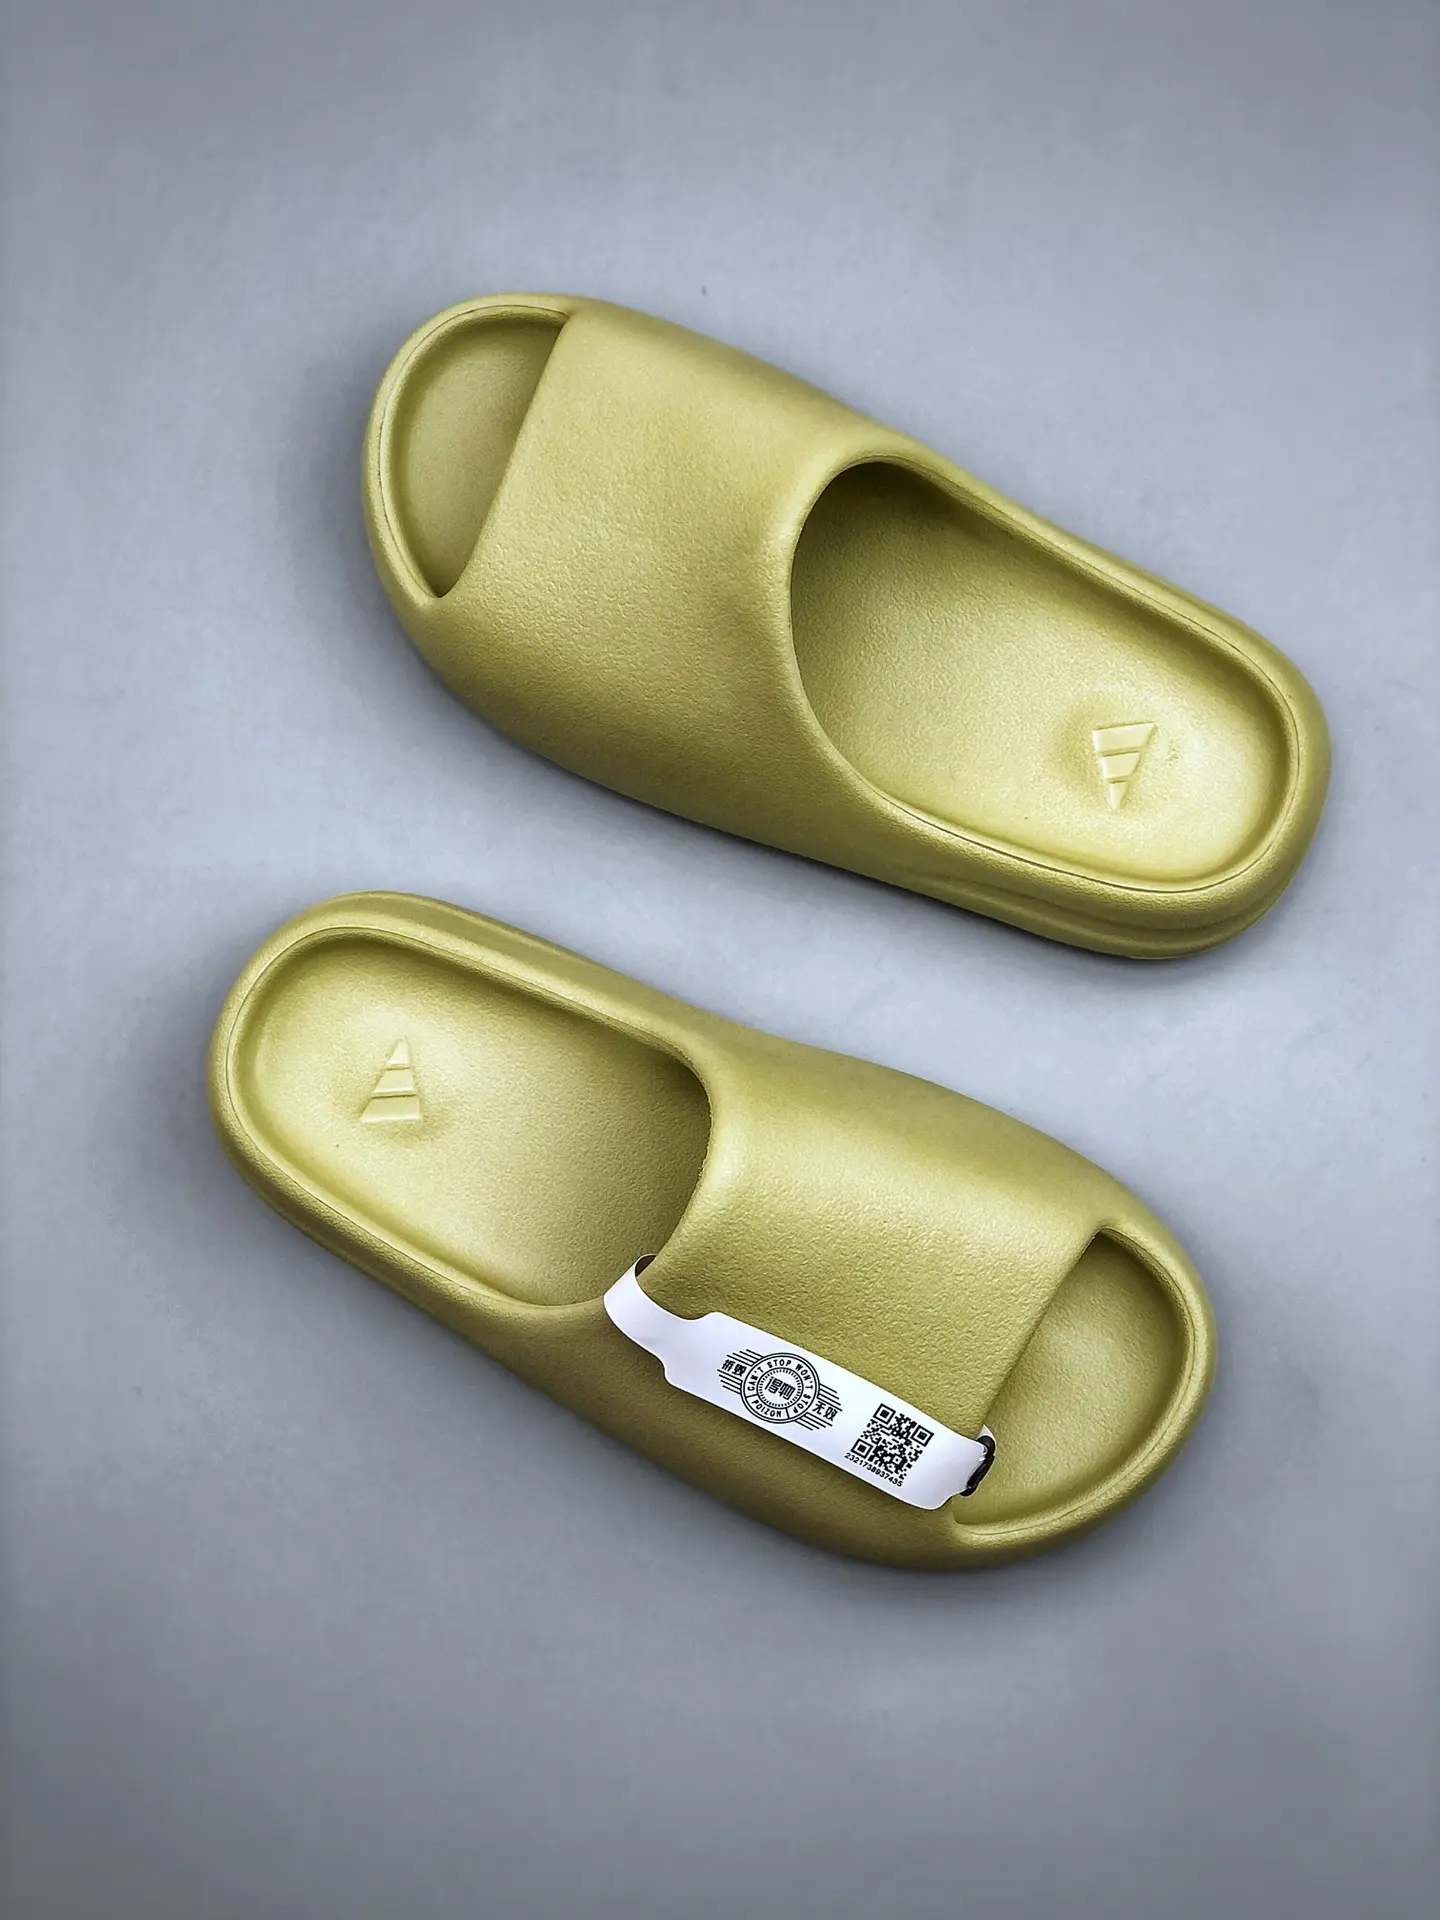 YASSW | A Comprehensive Review of Yeezy Slides: The Perfect Blend of Style and Comfort